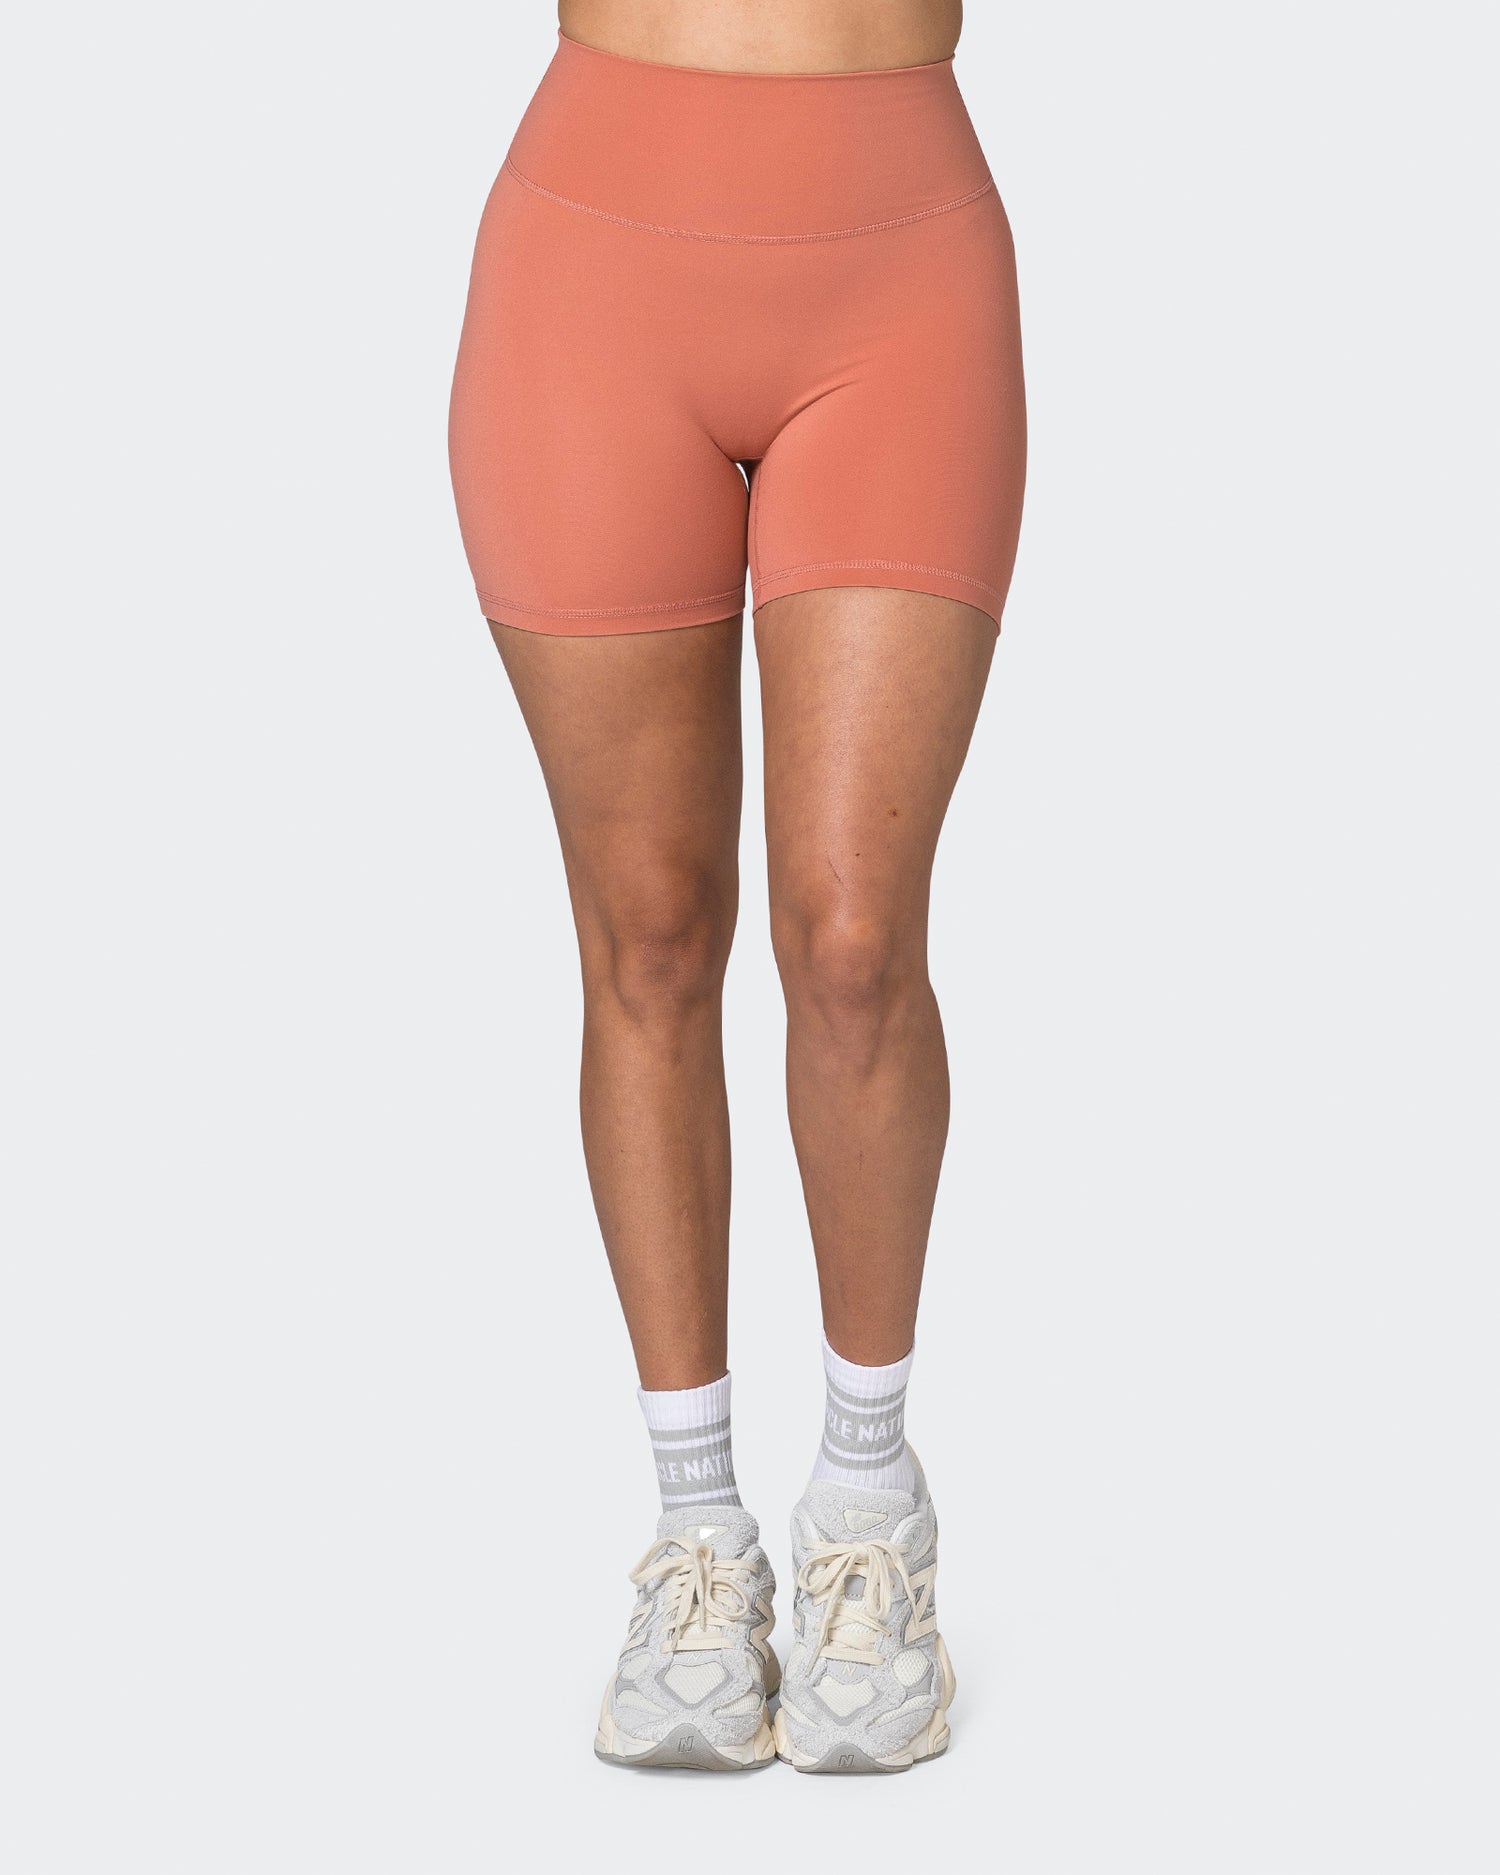 Game Changer Scrunch Midway Shorts - Powdered Pink